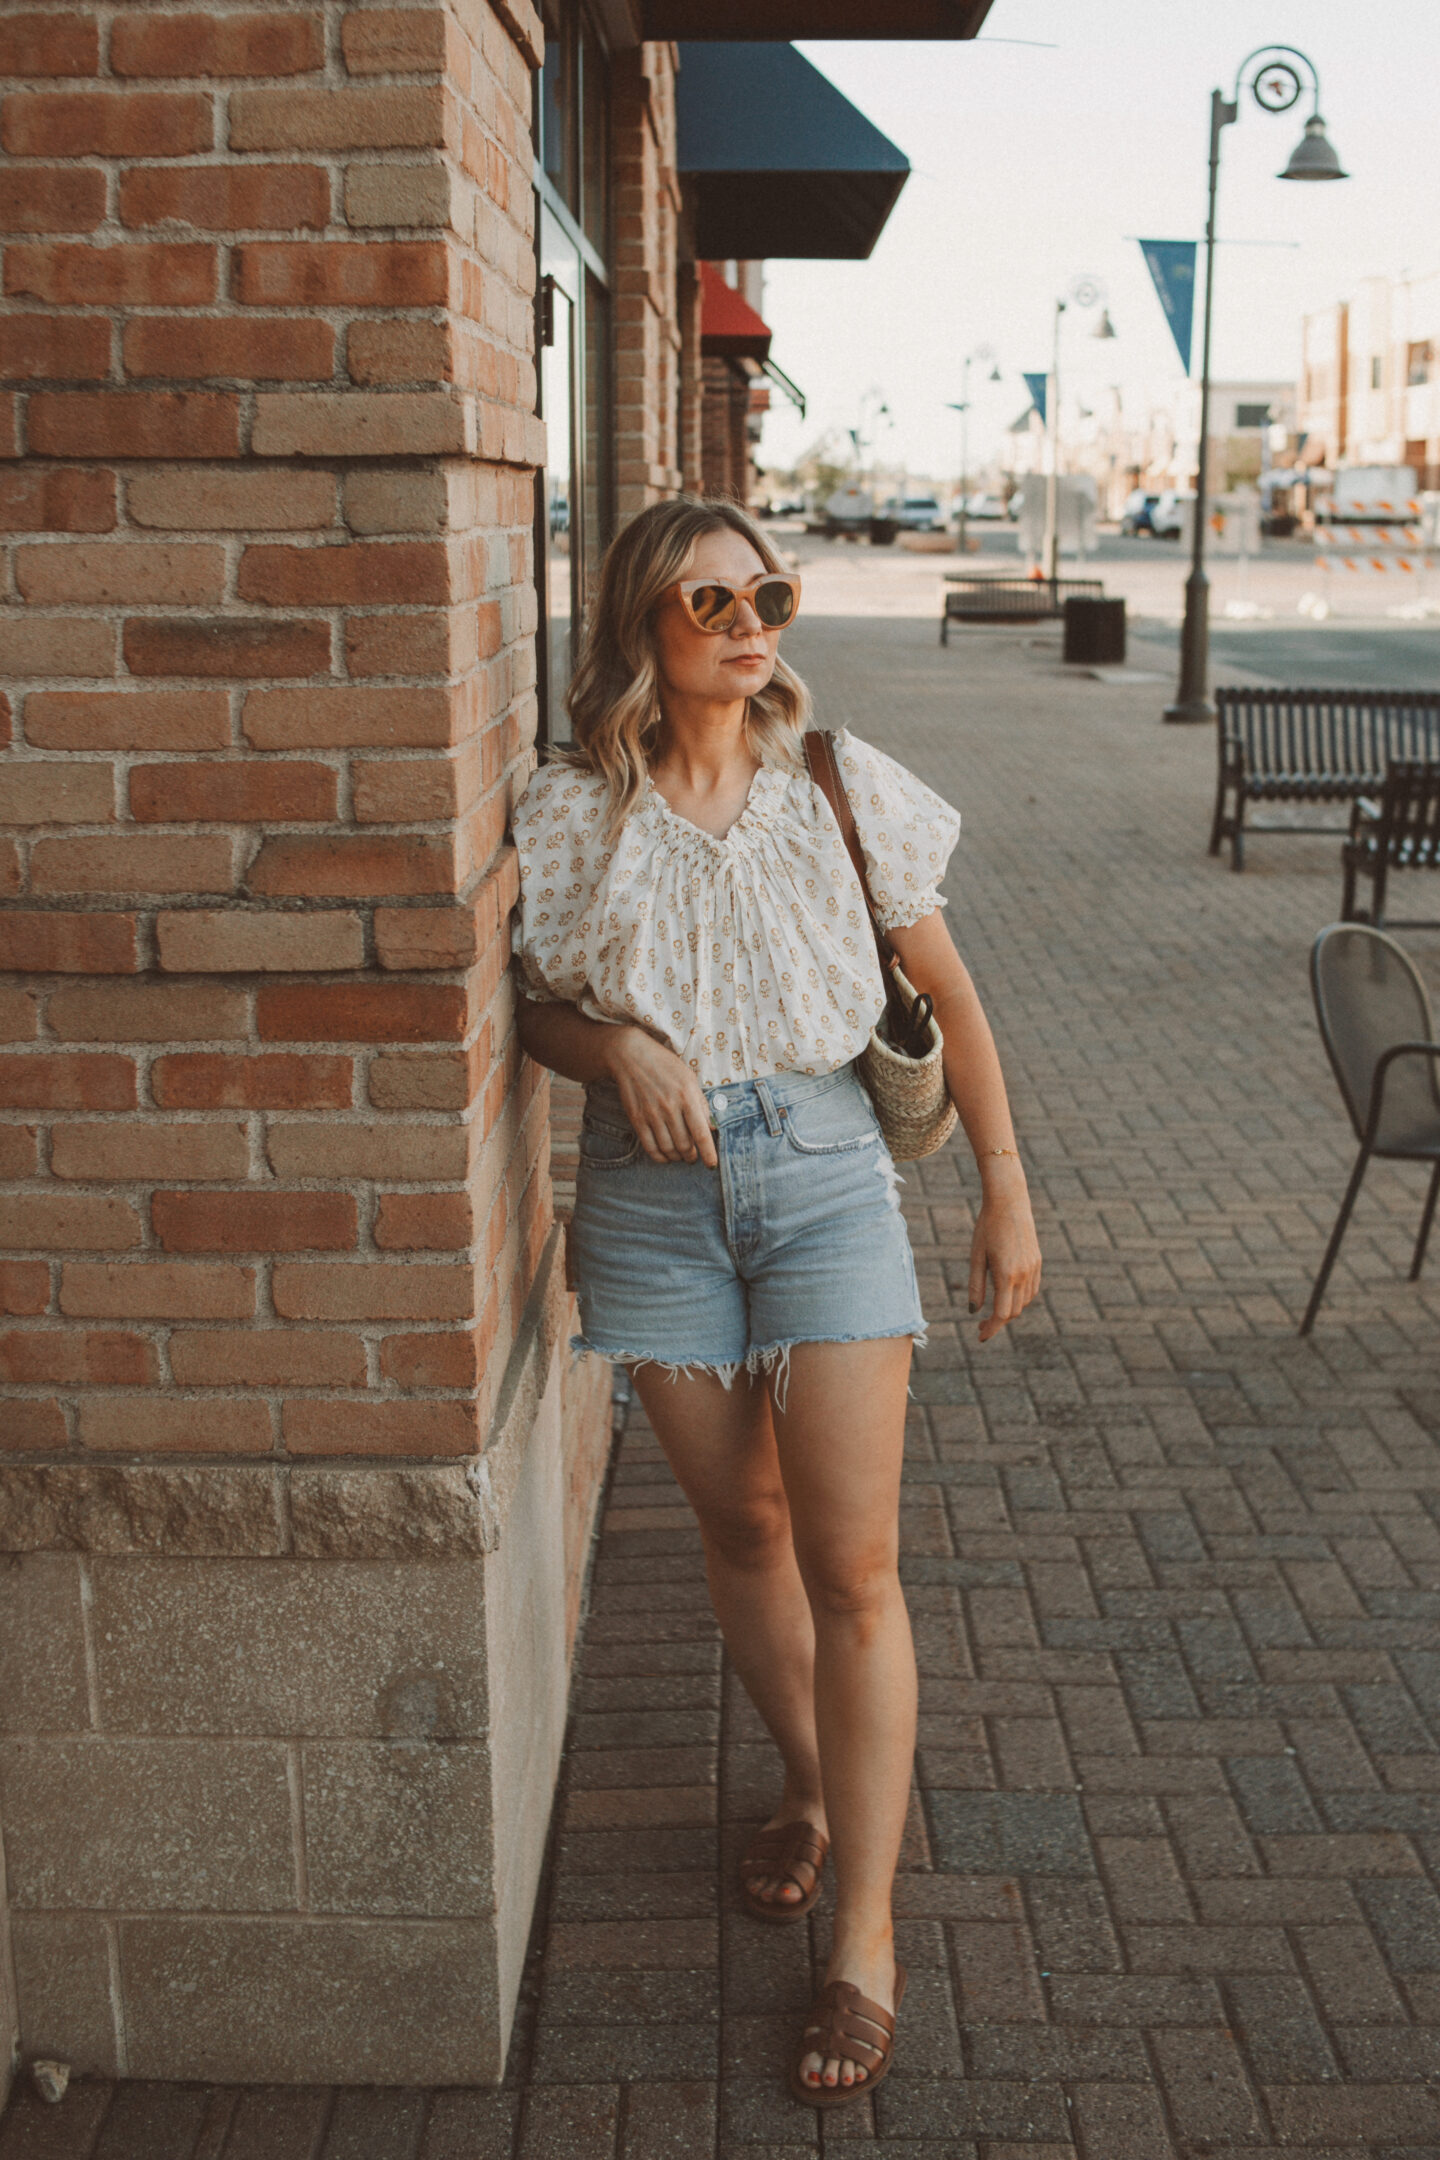 Karin Emily wears her favorite denim shorts with a white blouse